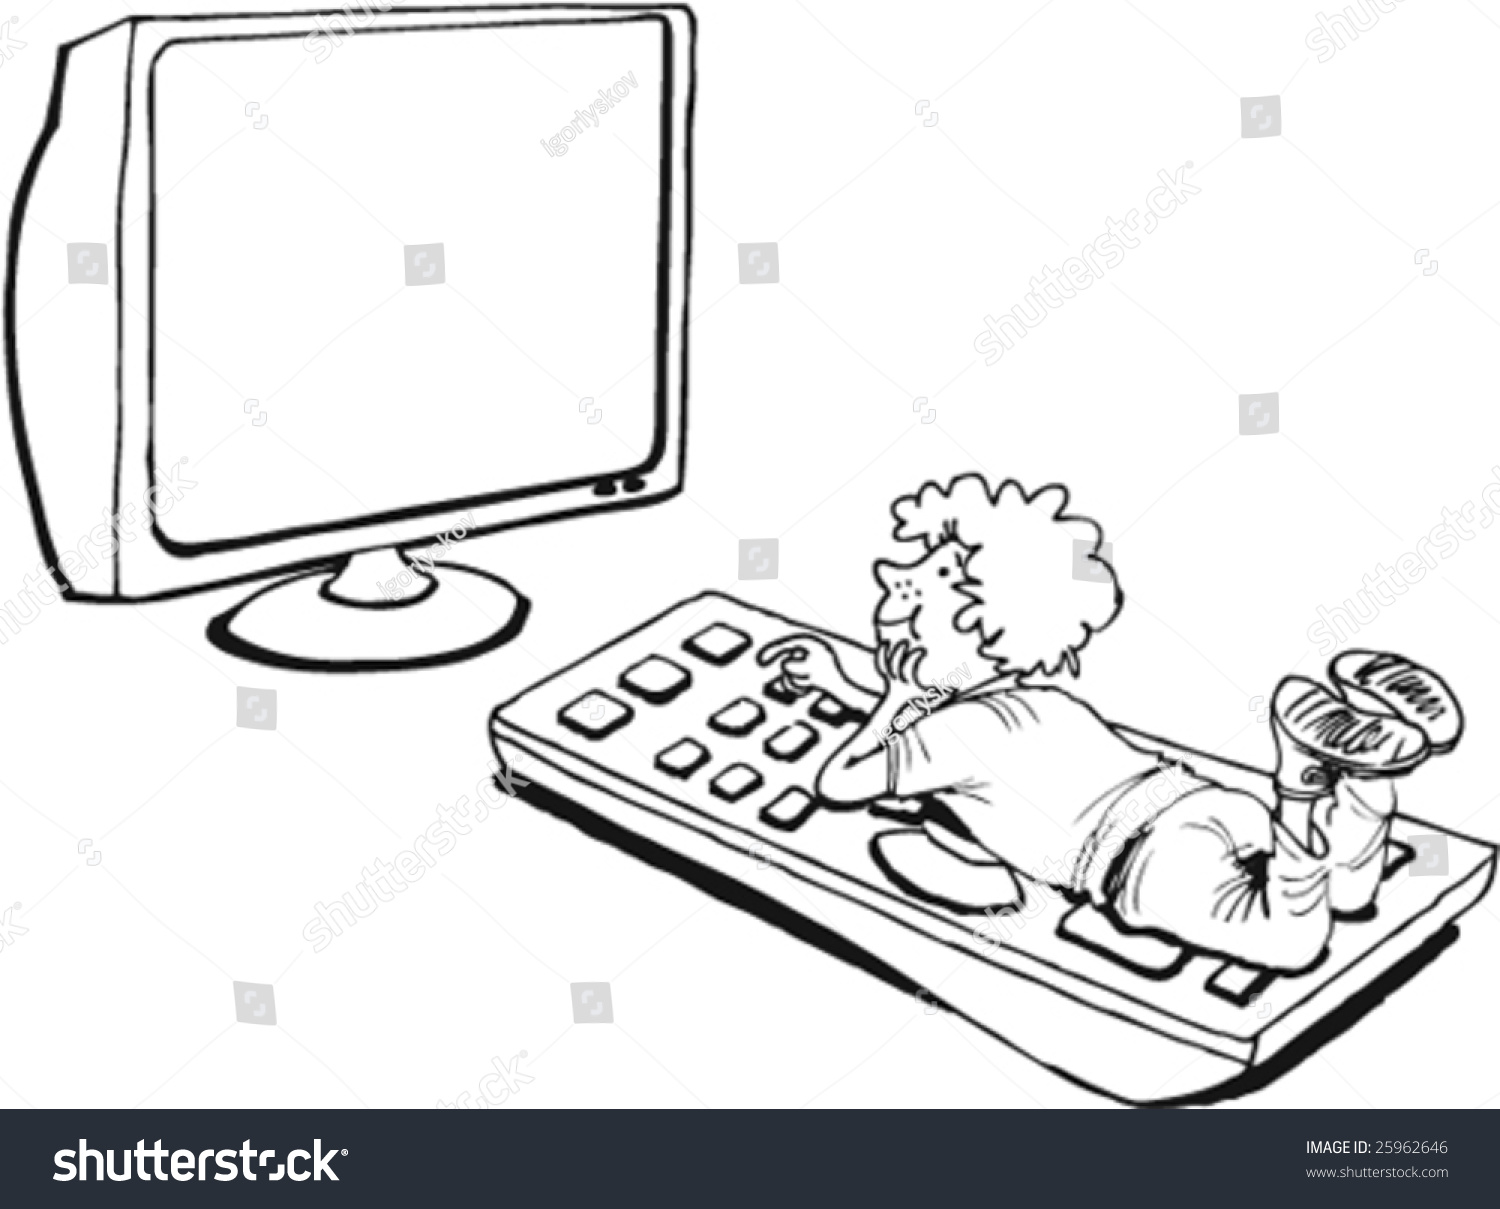 Kid Watching Tv On A Remote-Control Stock Vector Illustration 25962646 ...